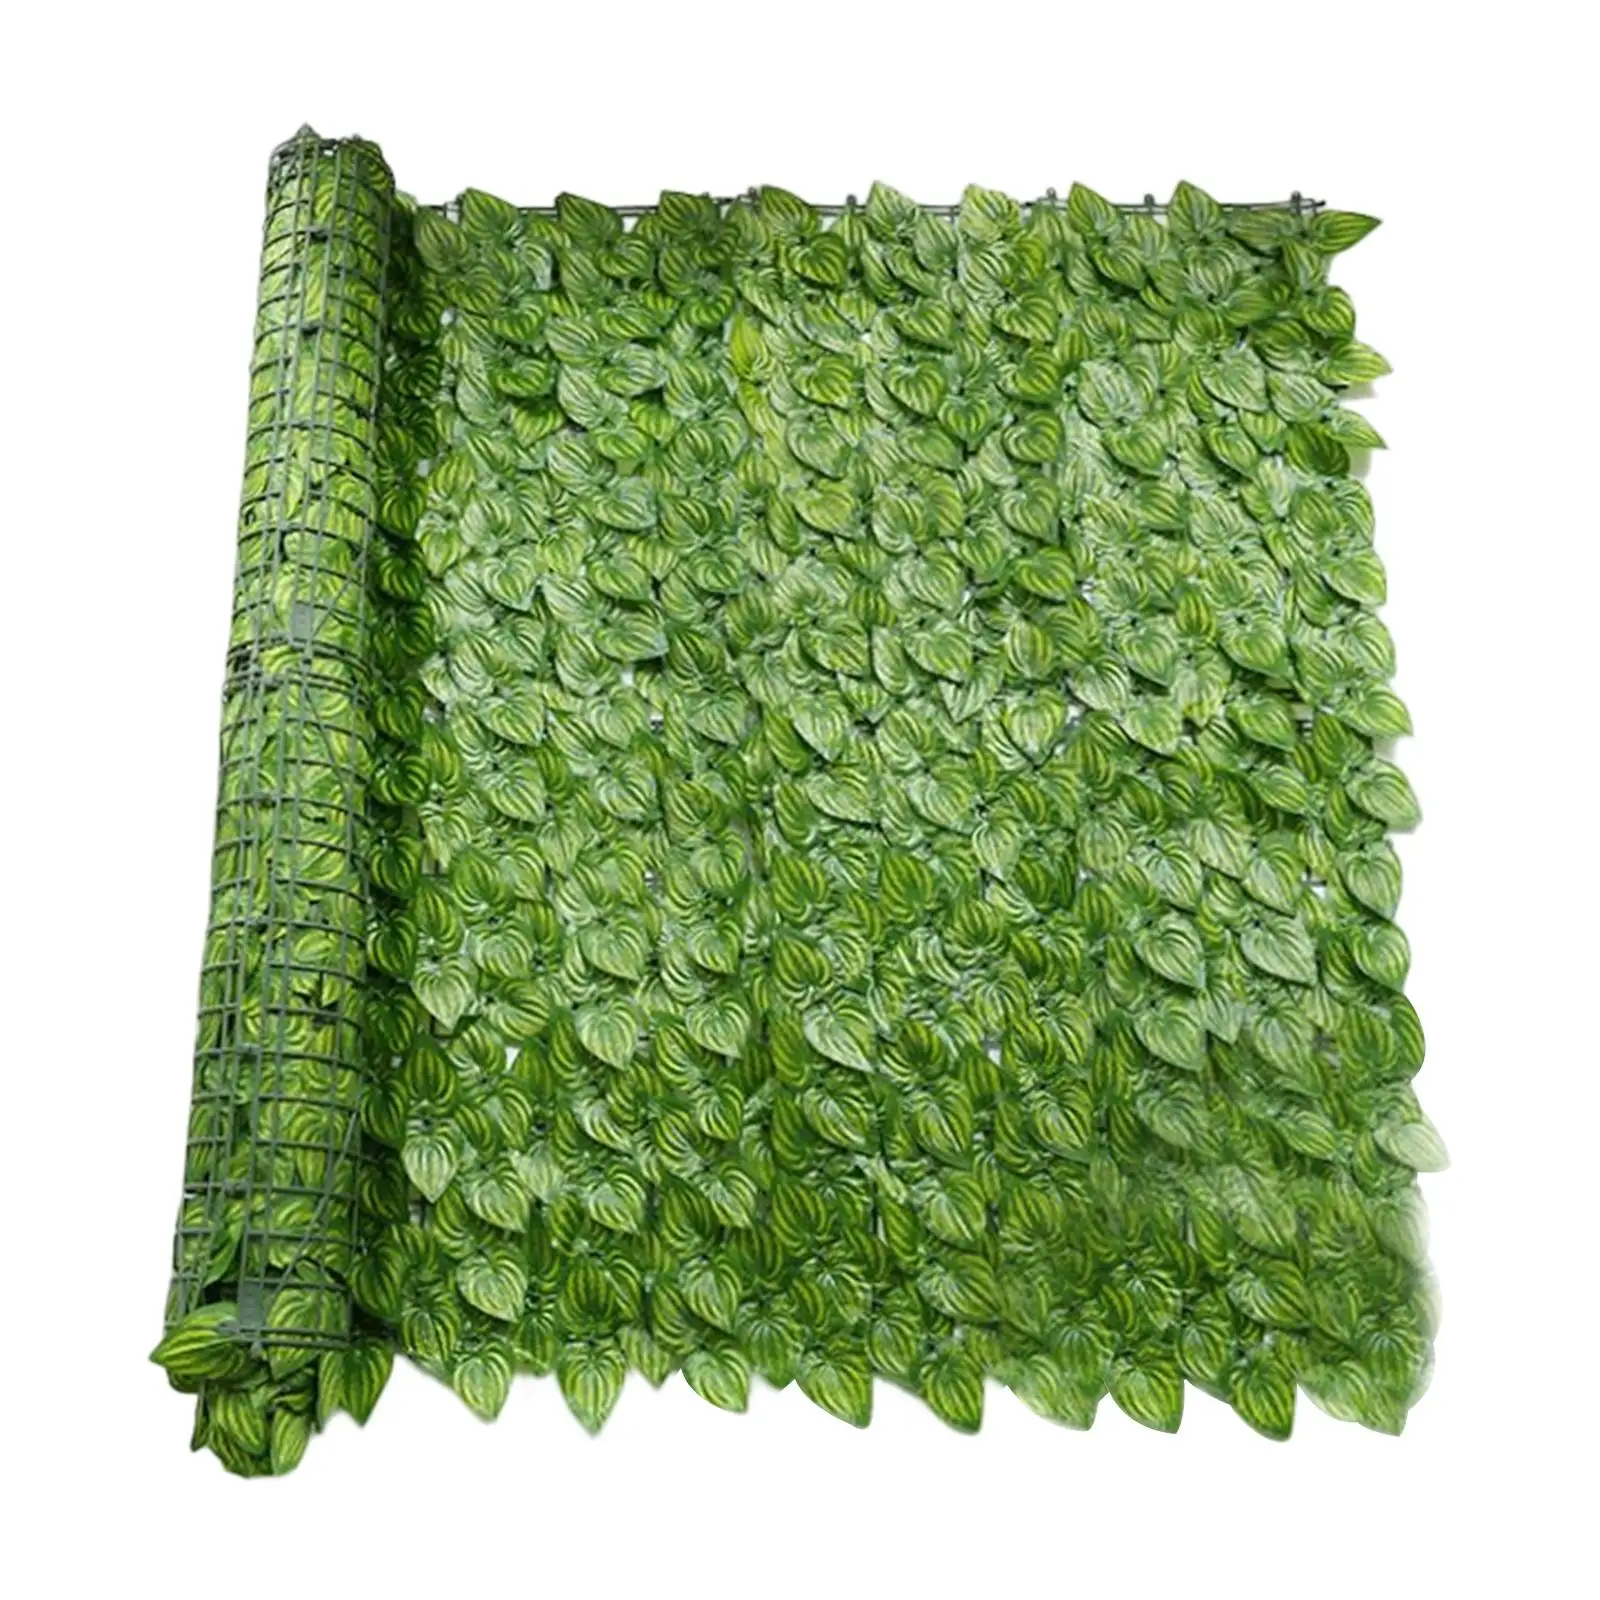 Realistic Artificial Leaf Privacy Fence Screen Ornament 0.5MX1M Vine Forest Green Leaves Greenery Walls for Garden Balcony Yard